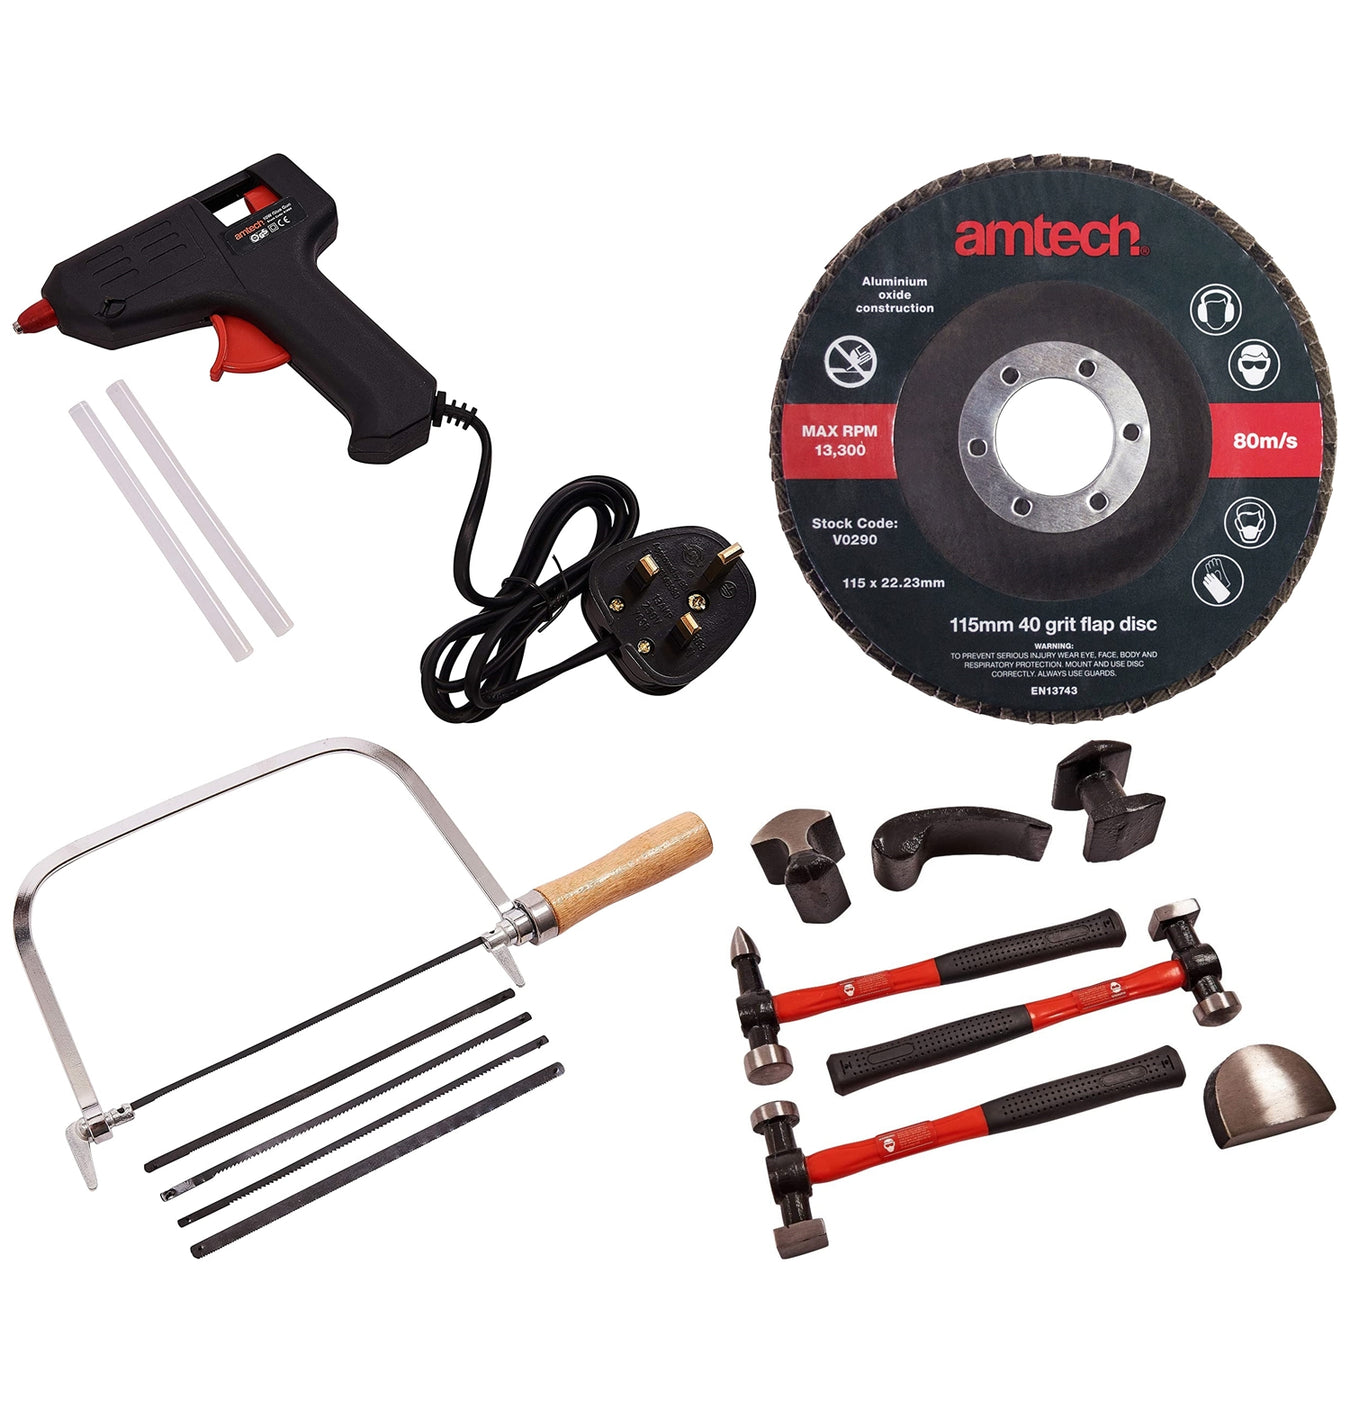 Hand Tools & Accessories